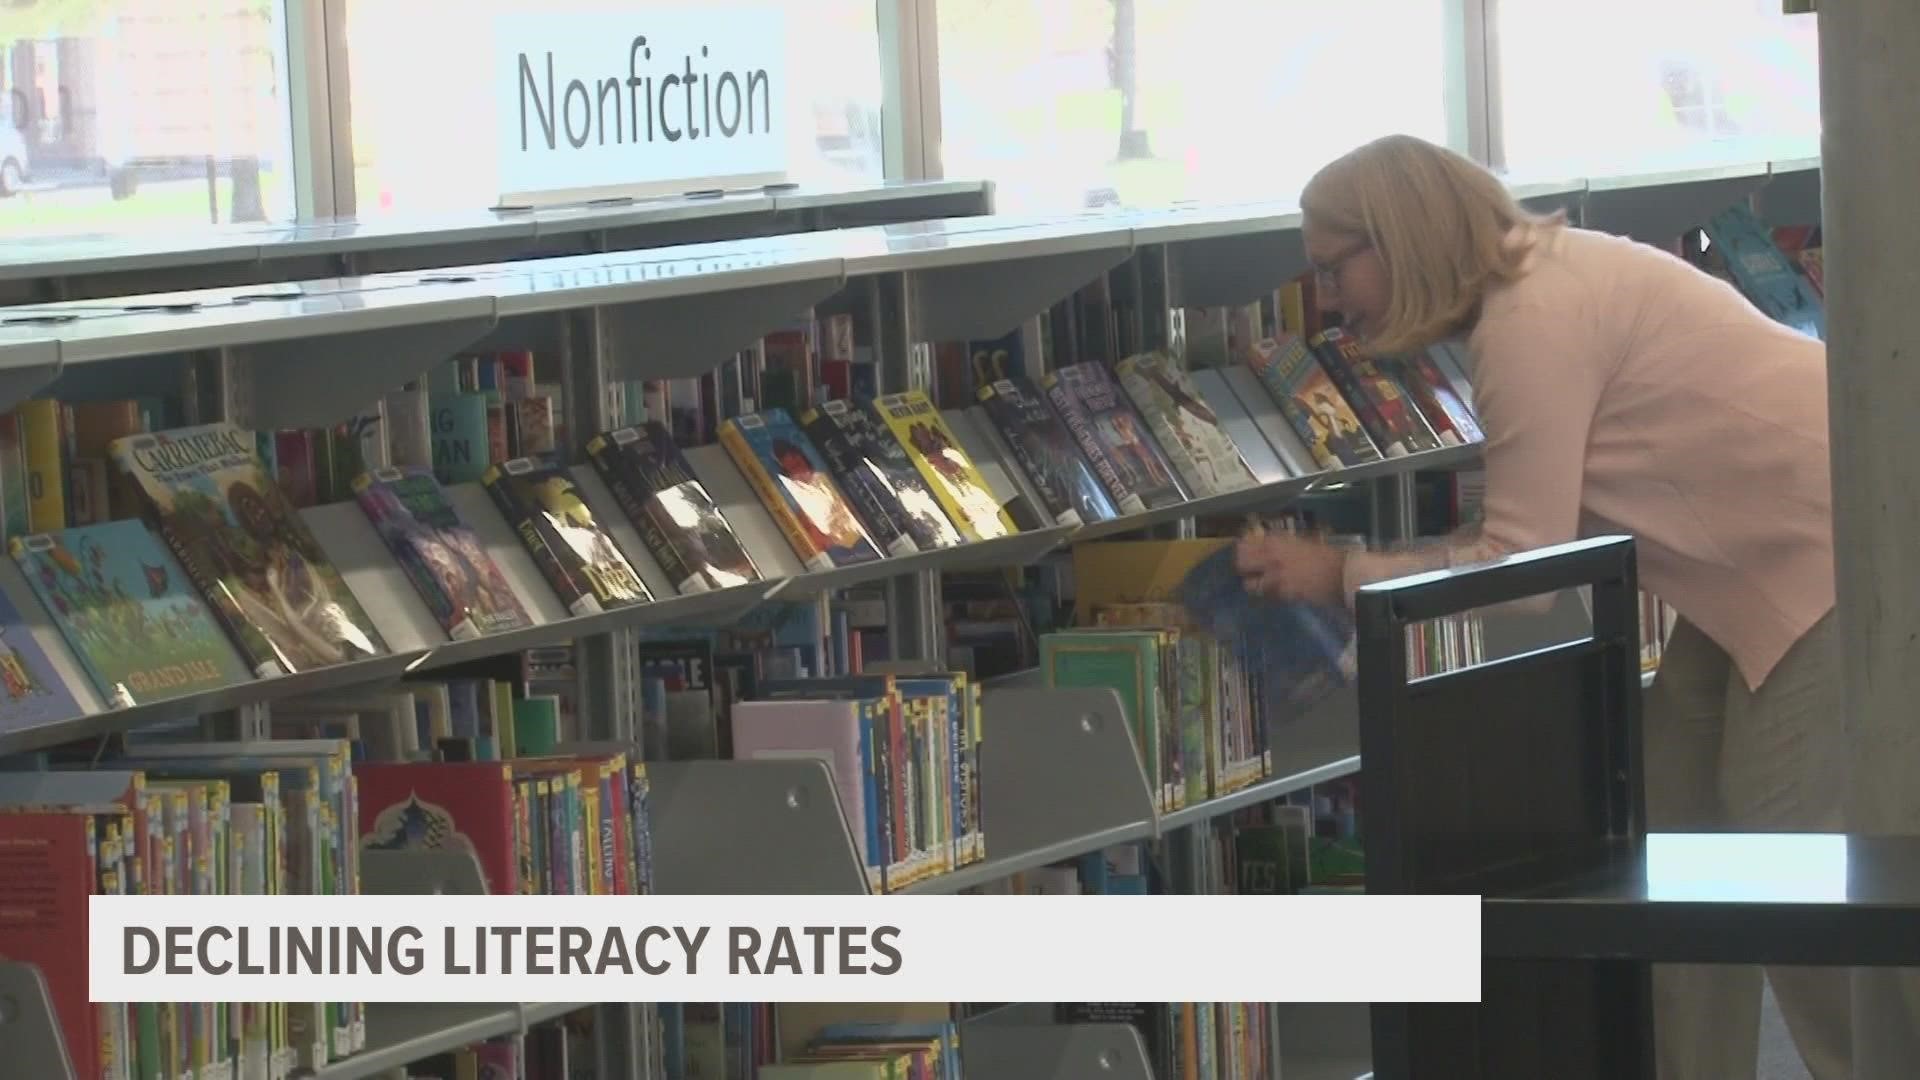 The Des Moines Public Library is running a summer reading program to help with literacy rates in children.